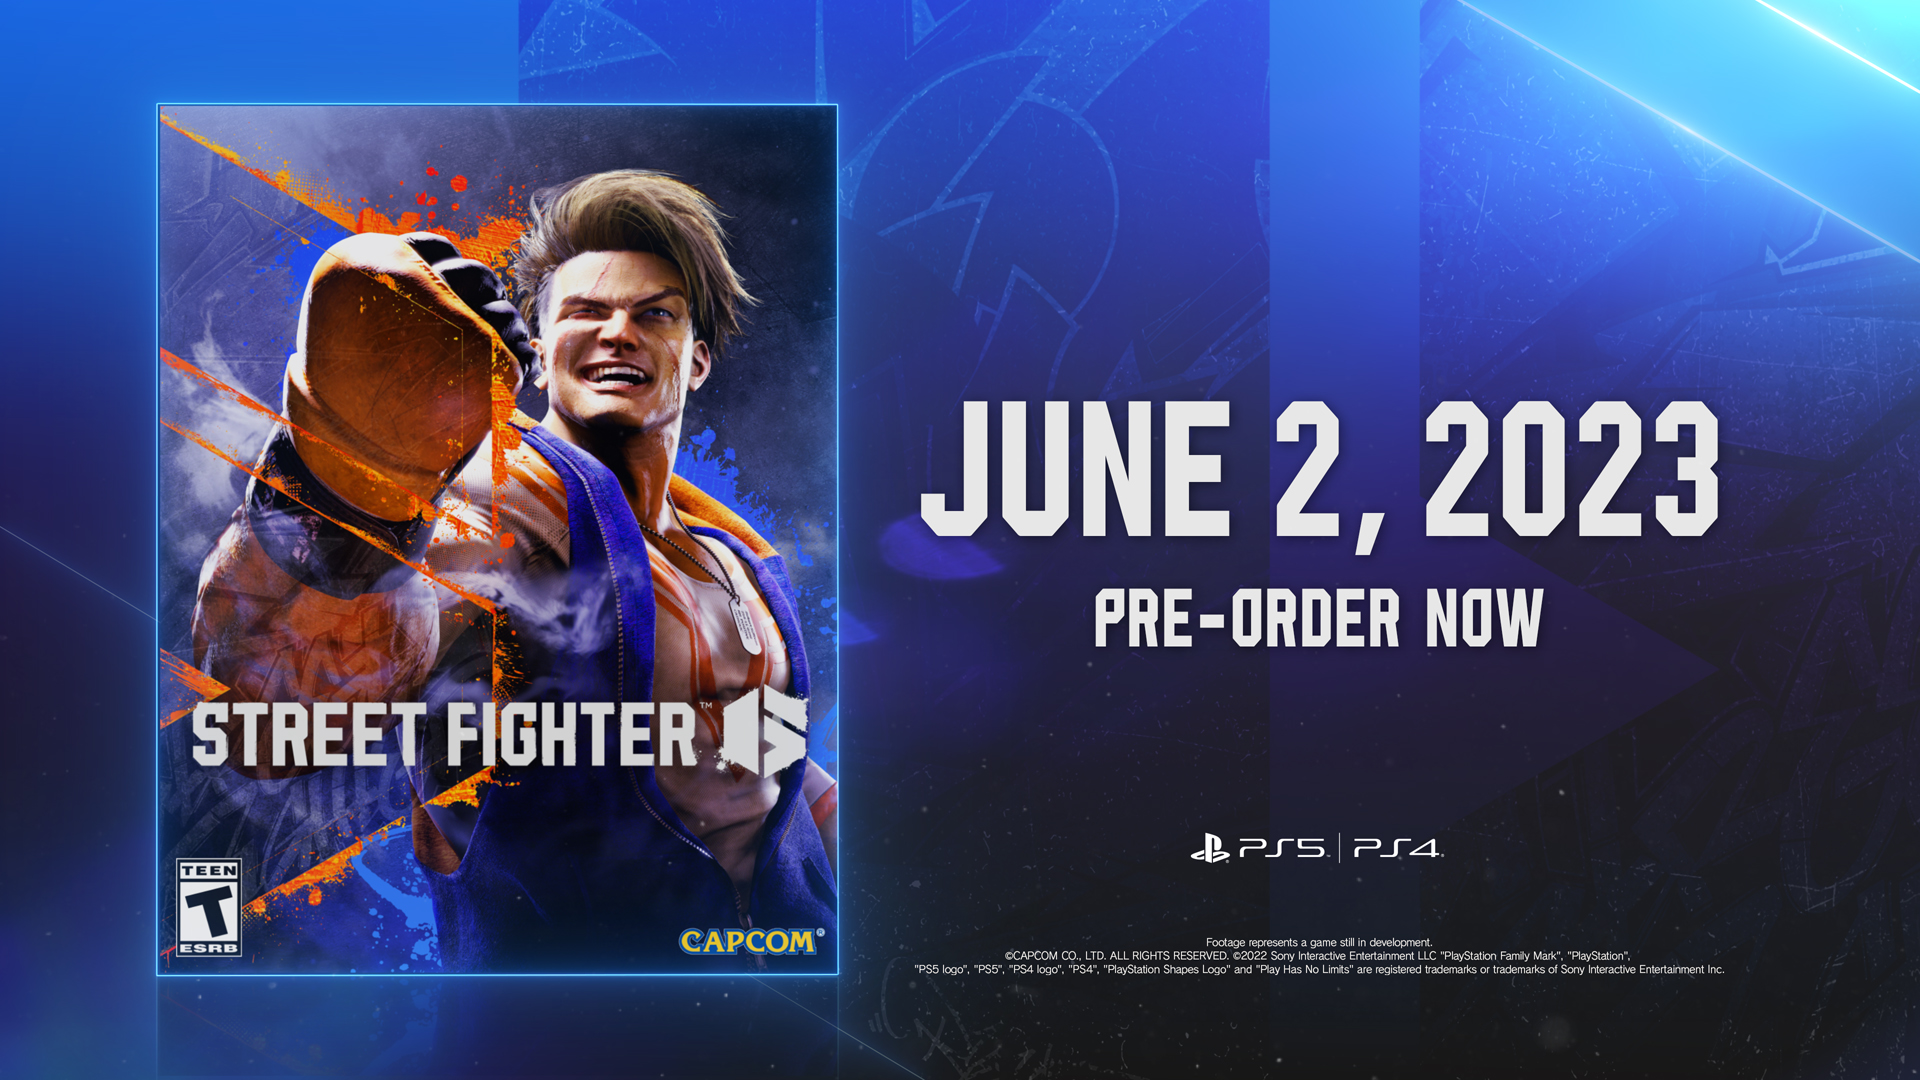 Looks like Street Fighter 6 has been accidentally confirmed for June 2023